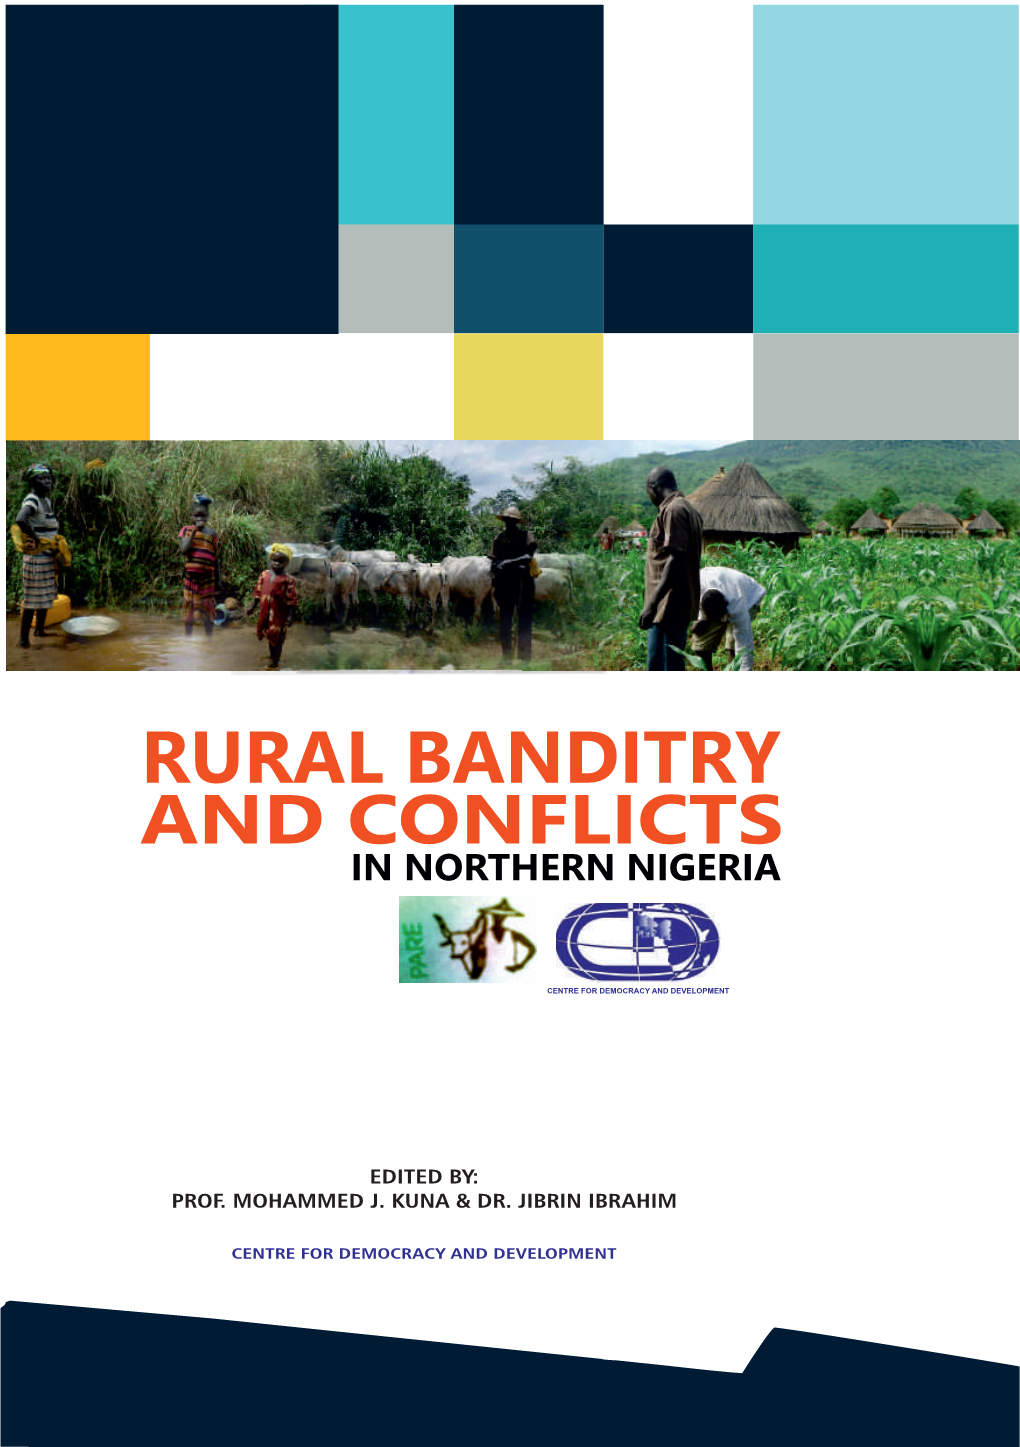 Rural Banditry and Conflicts in Northern Nigeria